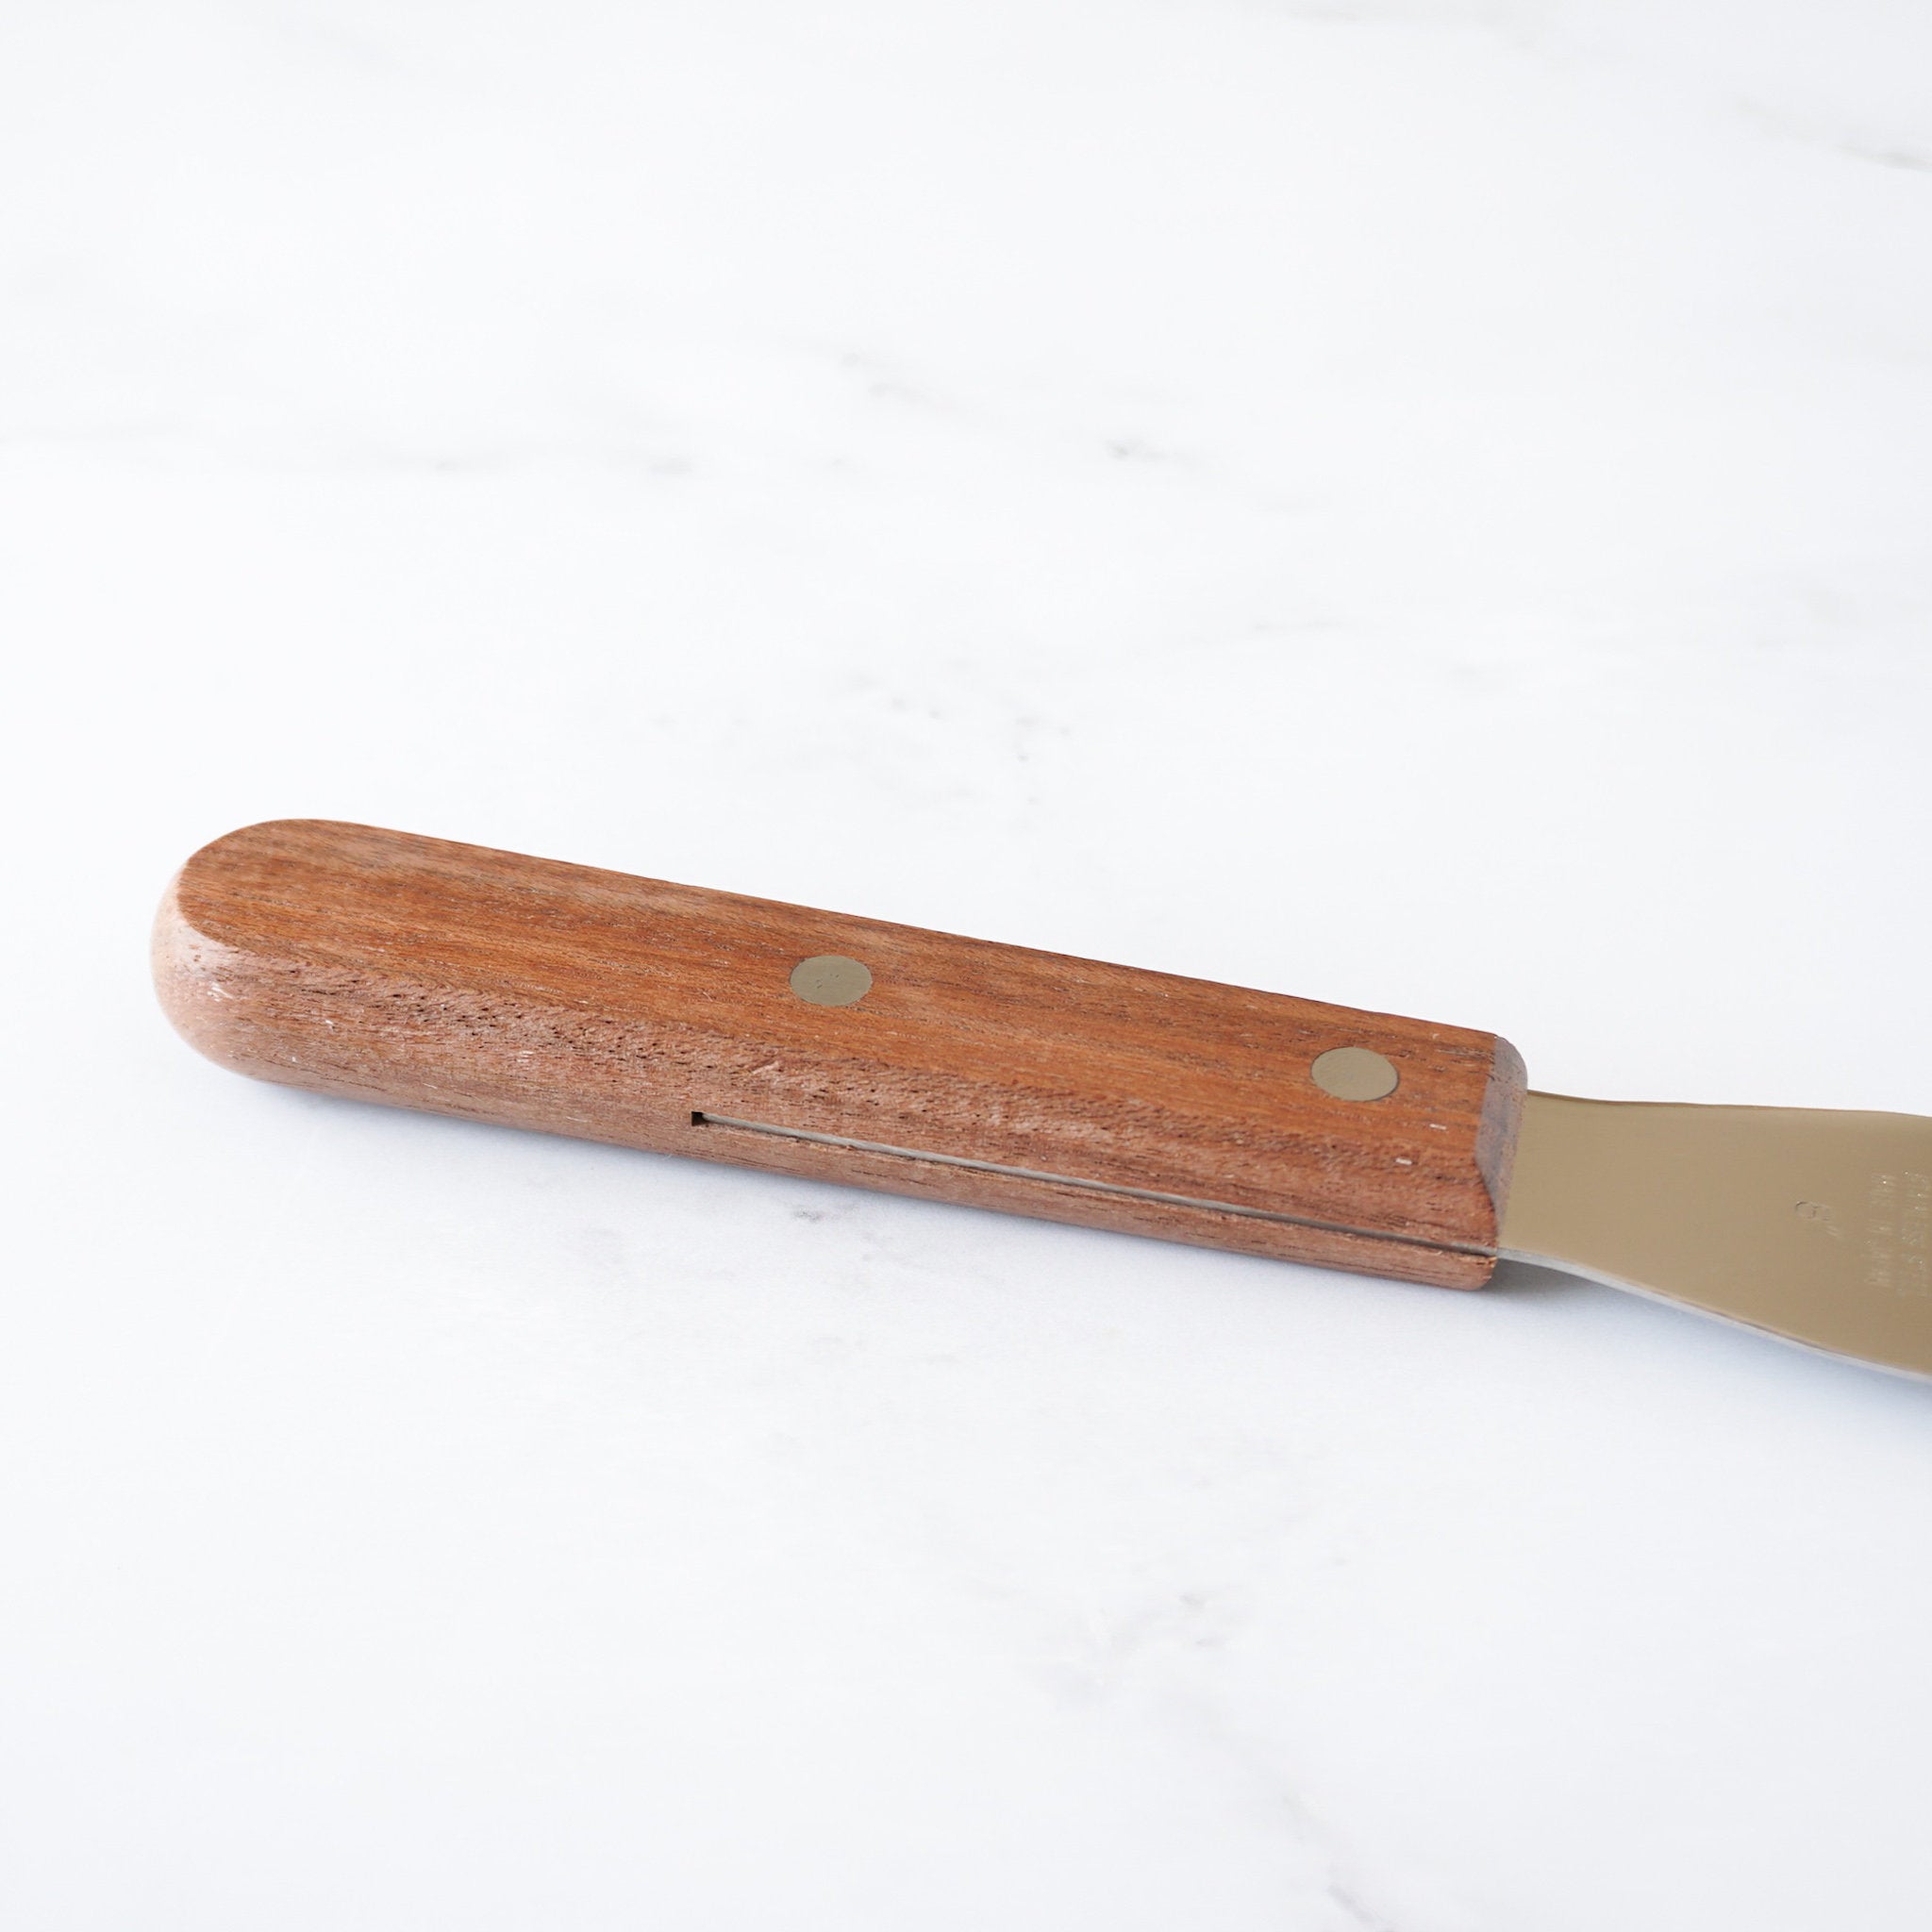 icing spatula with wooden handle